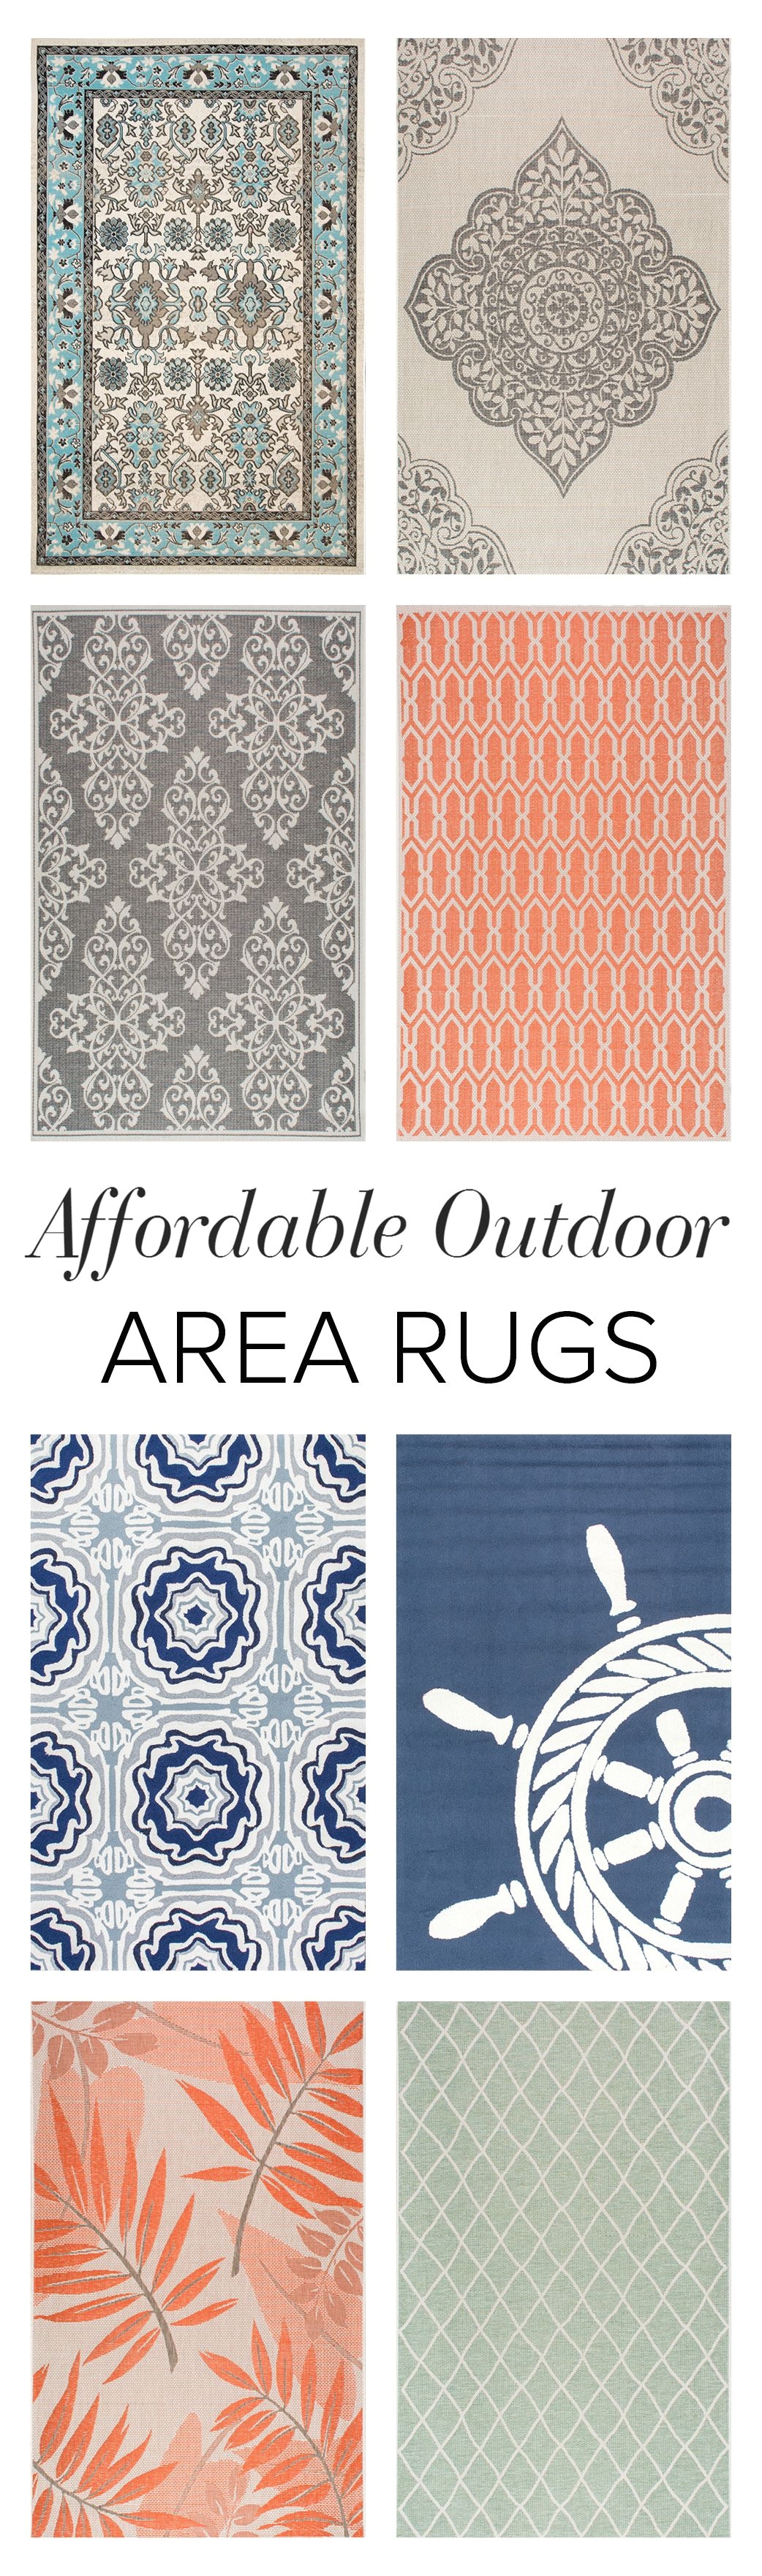 decorate your patio or backyard with an outdoor rug shop on rugs usa to find variety durability and amazing savings of up to 80 off